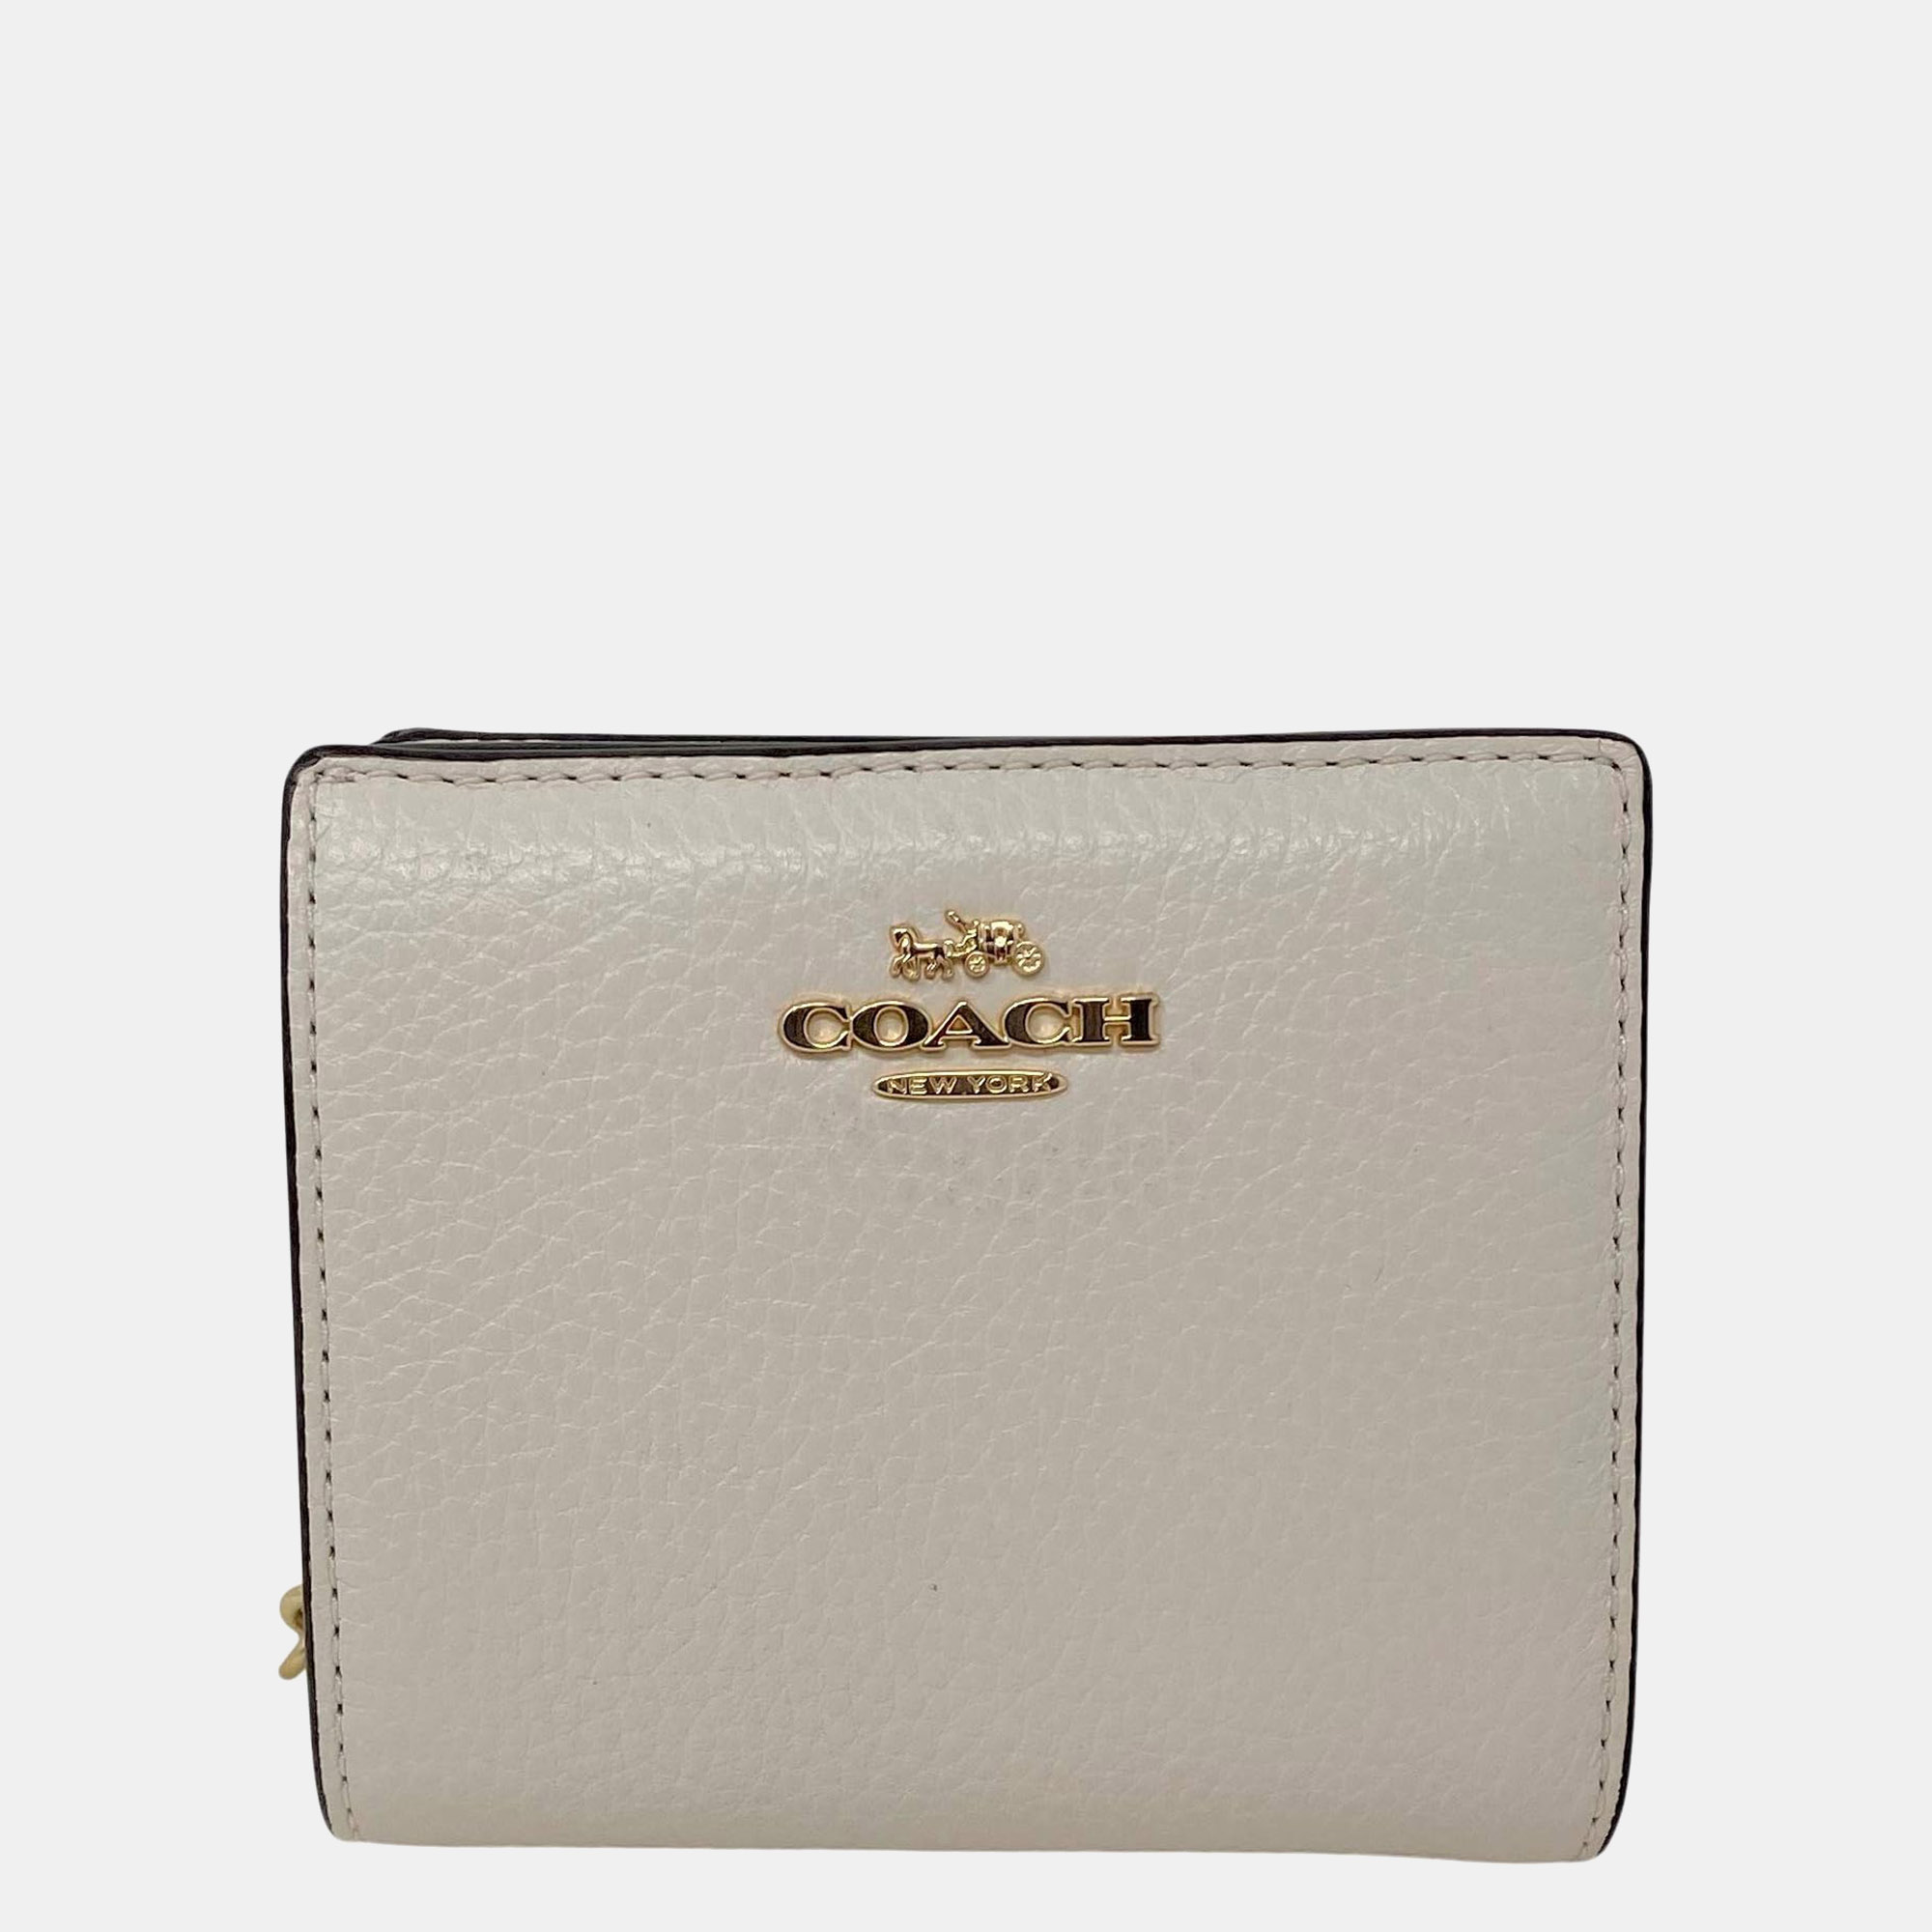 Coach White Leather Snap Wallet